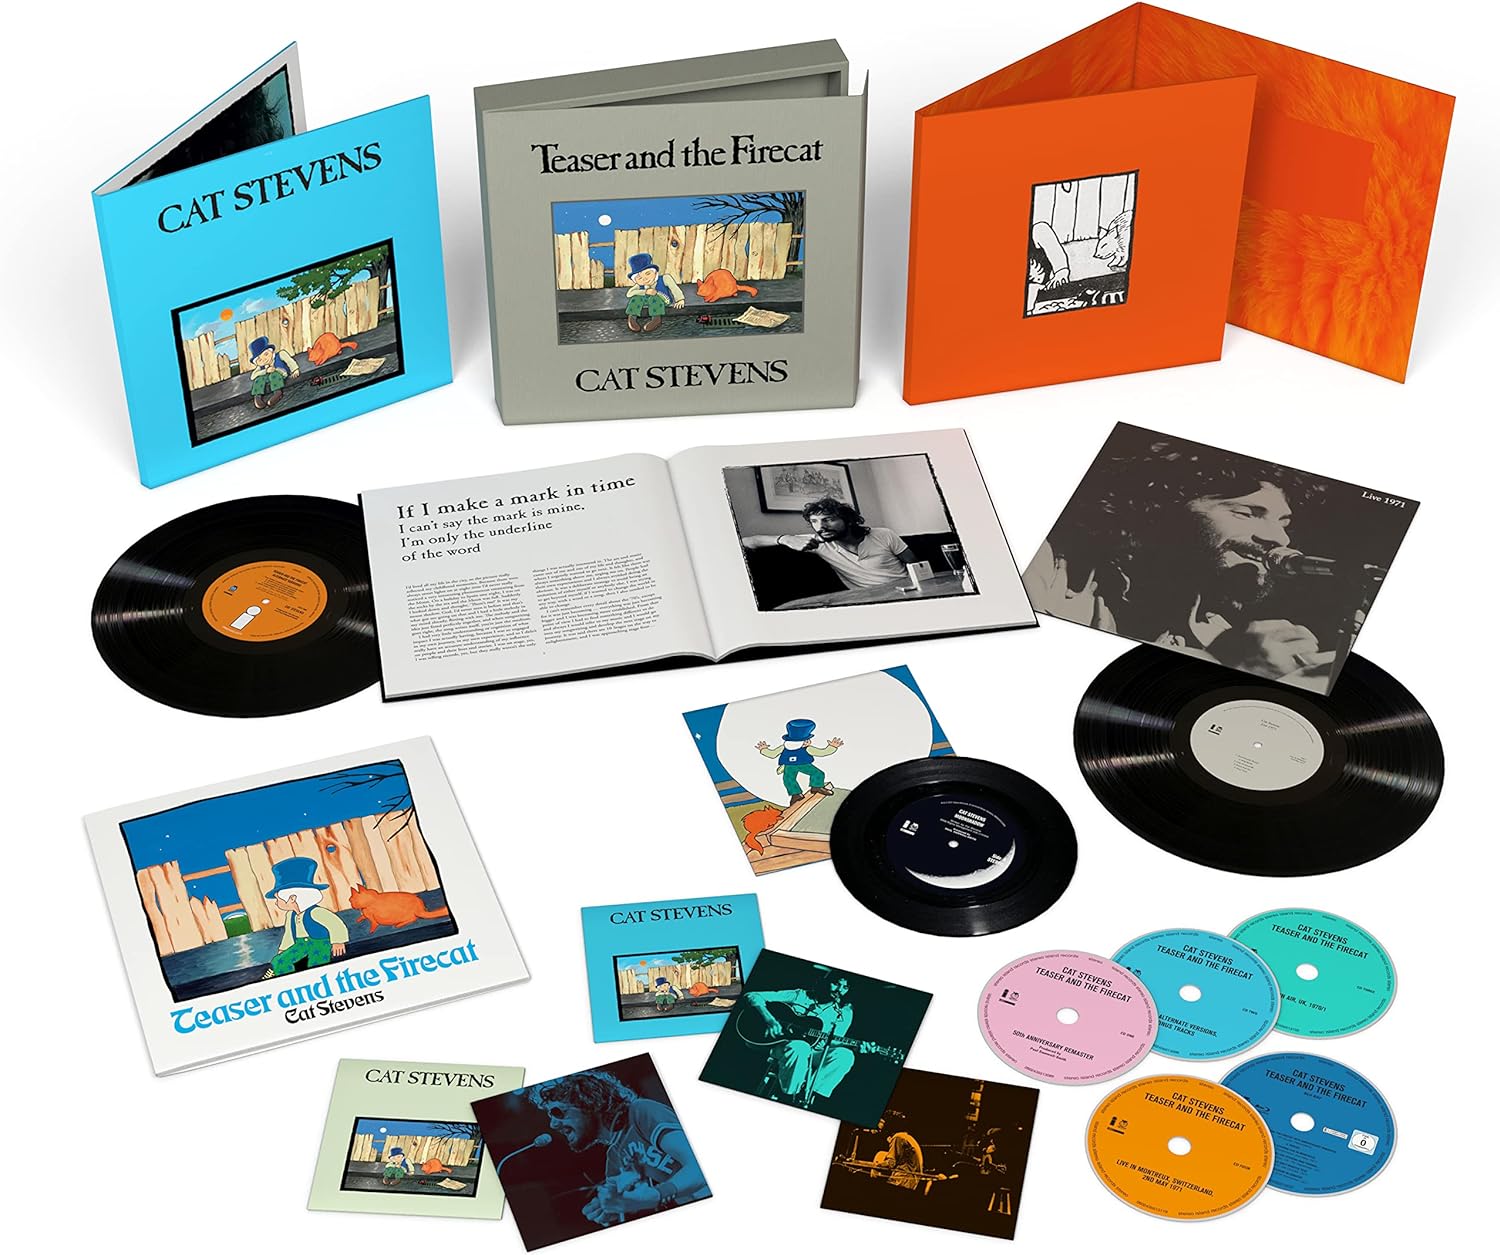 Teaser And The Firecat (50th Anniversary Edition) (Limited & Numbered Super Deluxe Box) - 2xVinyl, 4xCD, Blu-ray, Vinyl 7